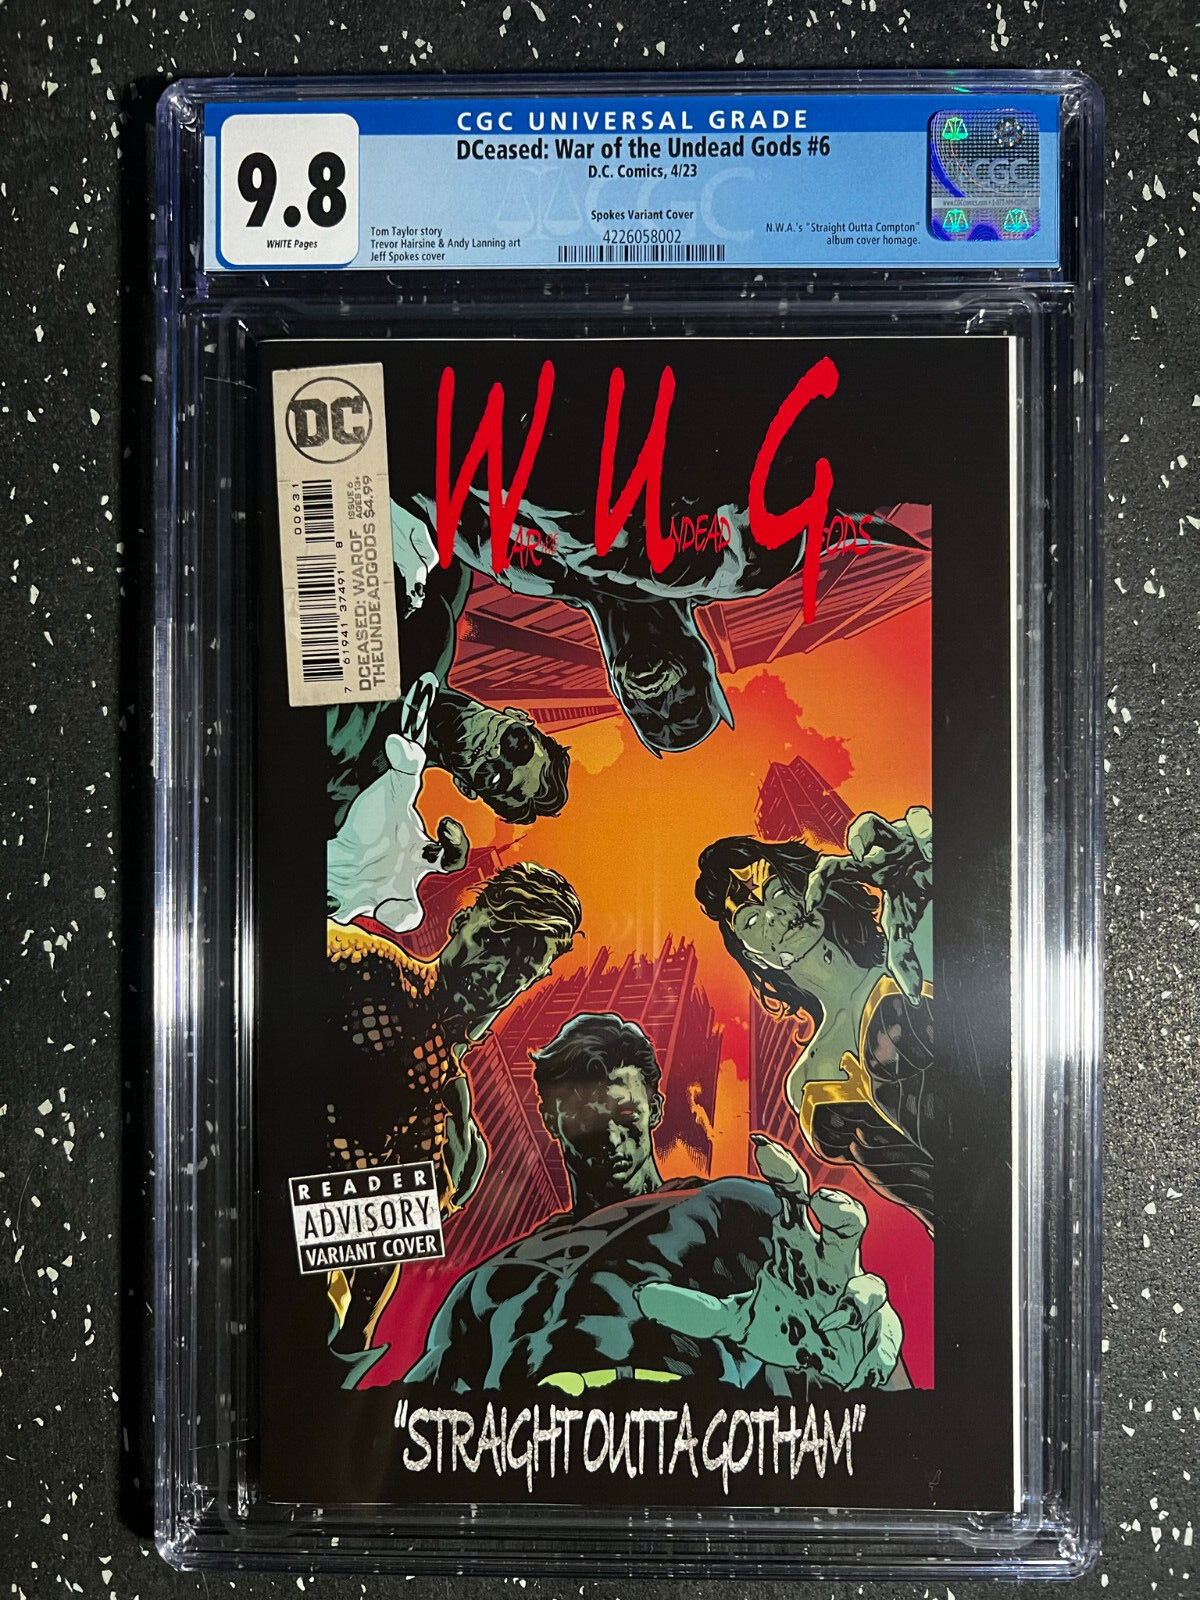 DCeased War of the Undead Gods #6 Jeff Spokes NWA Homage Variant Cover CGC 9.8